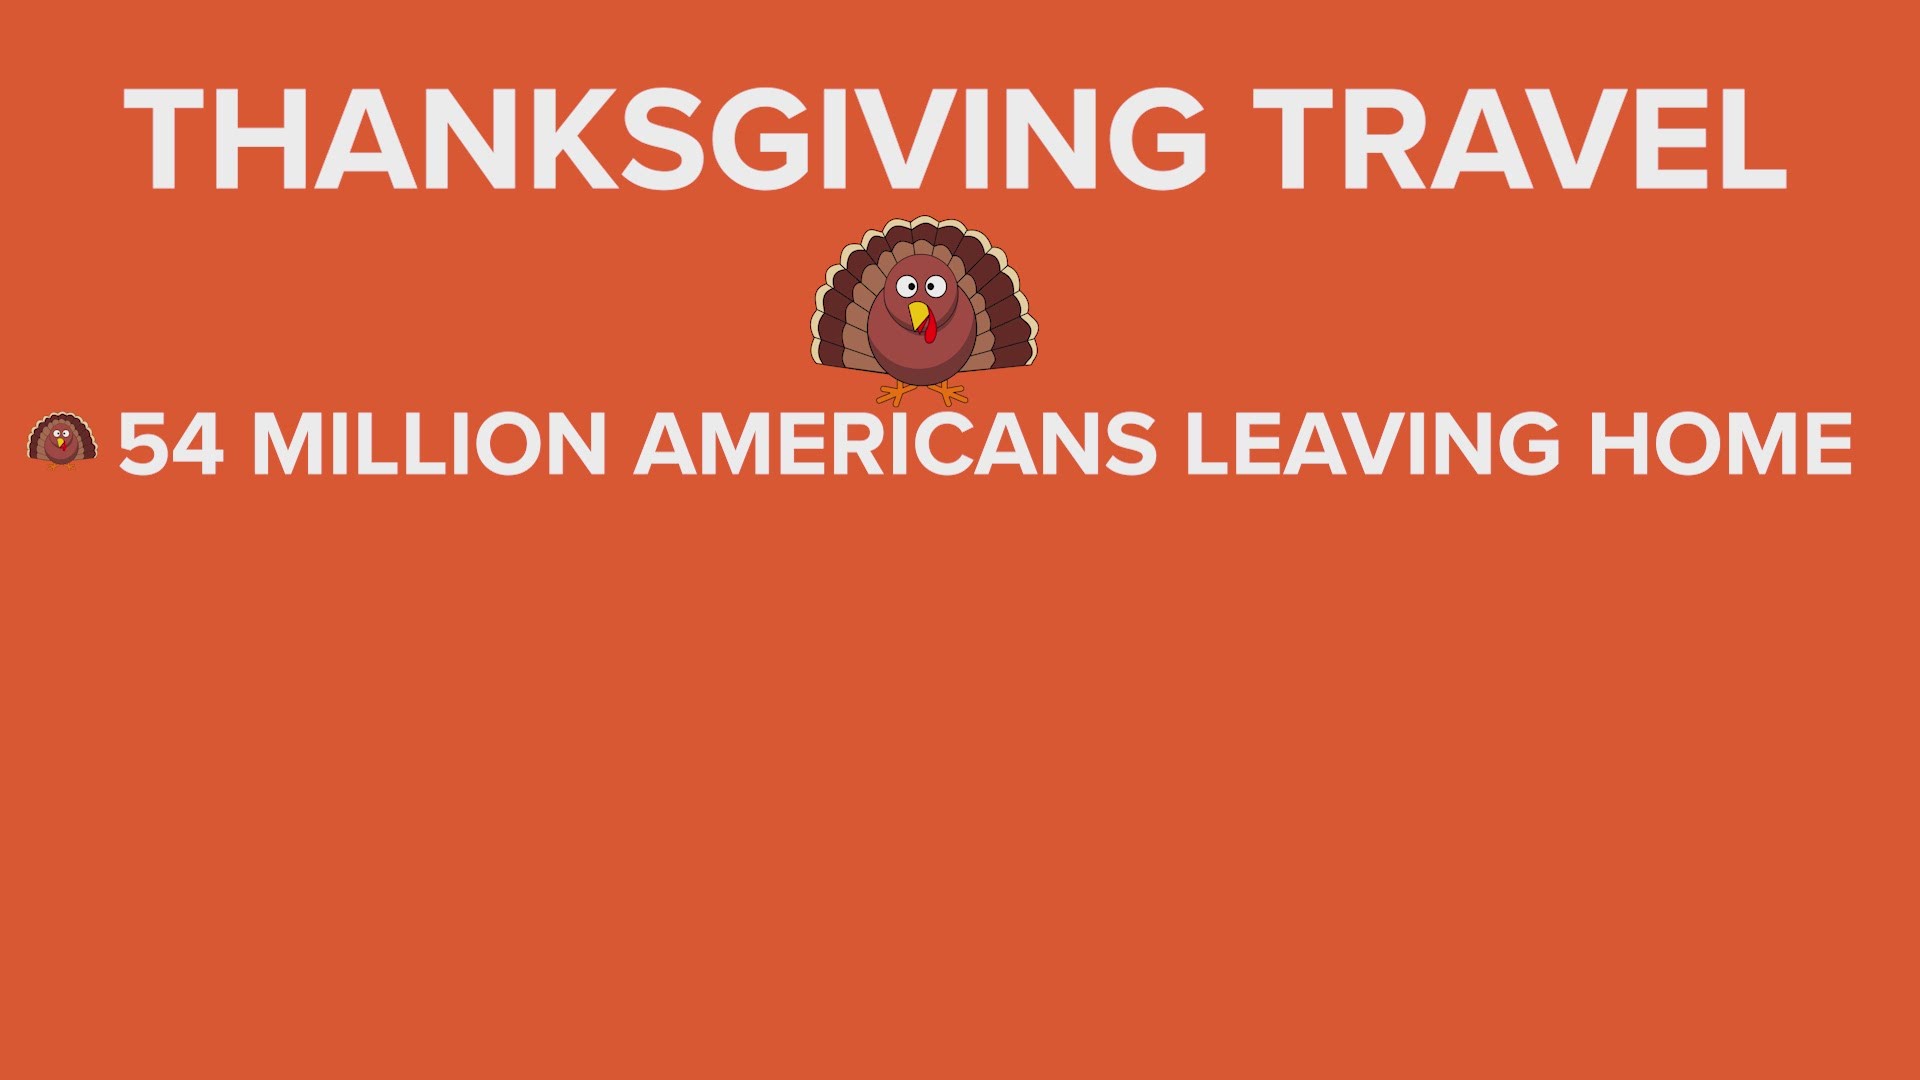 Are you getting on the road next week for Thanksgiving? Josh Zuber with AAA is reporting over 3.8 million Texans will hit the road leading up to Turkey Day.